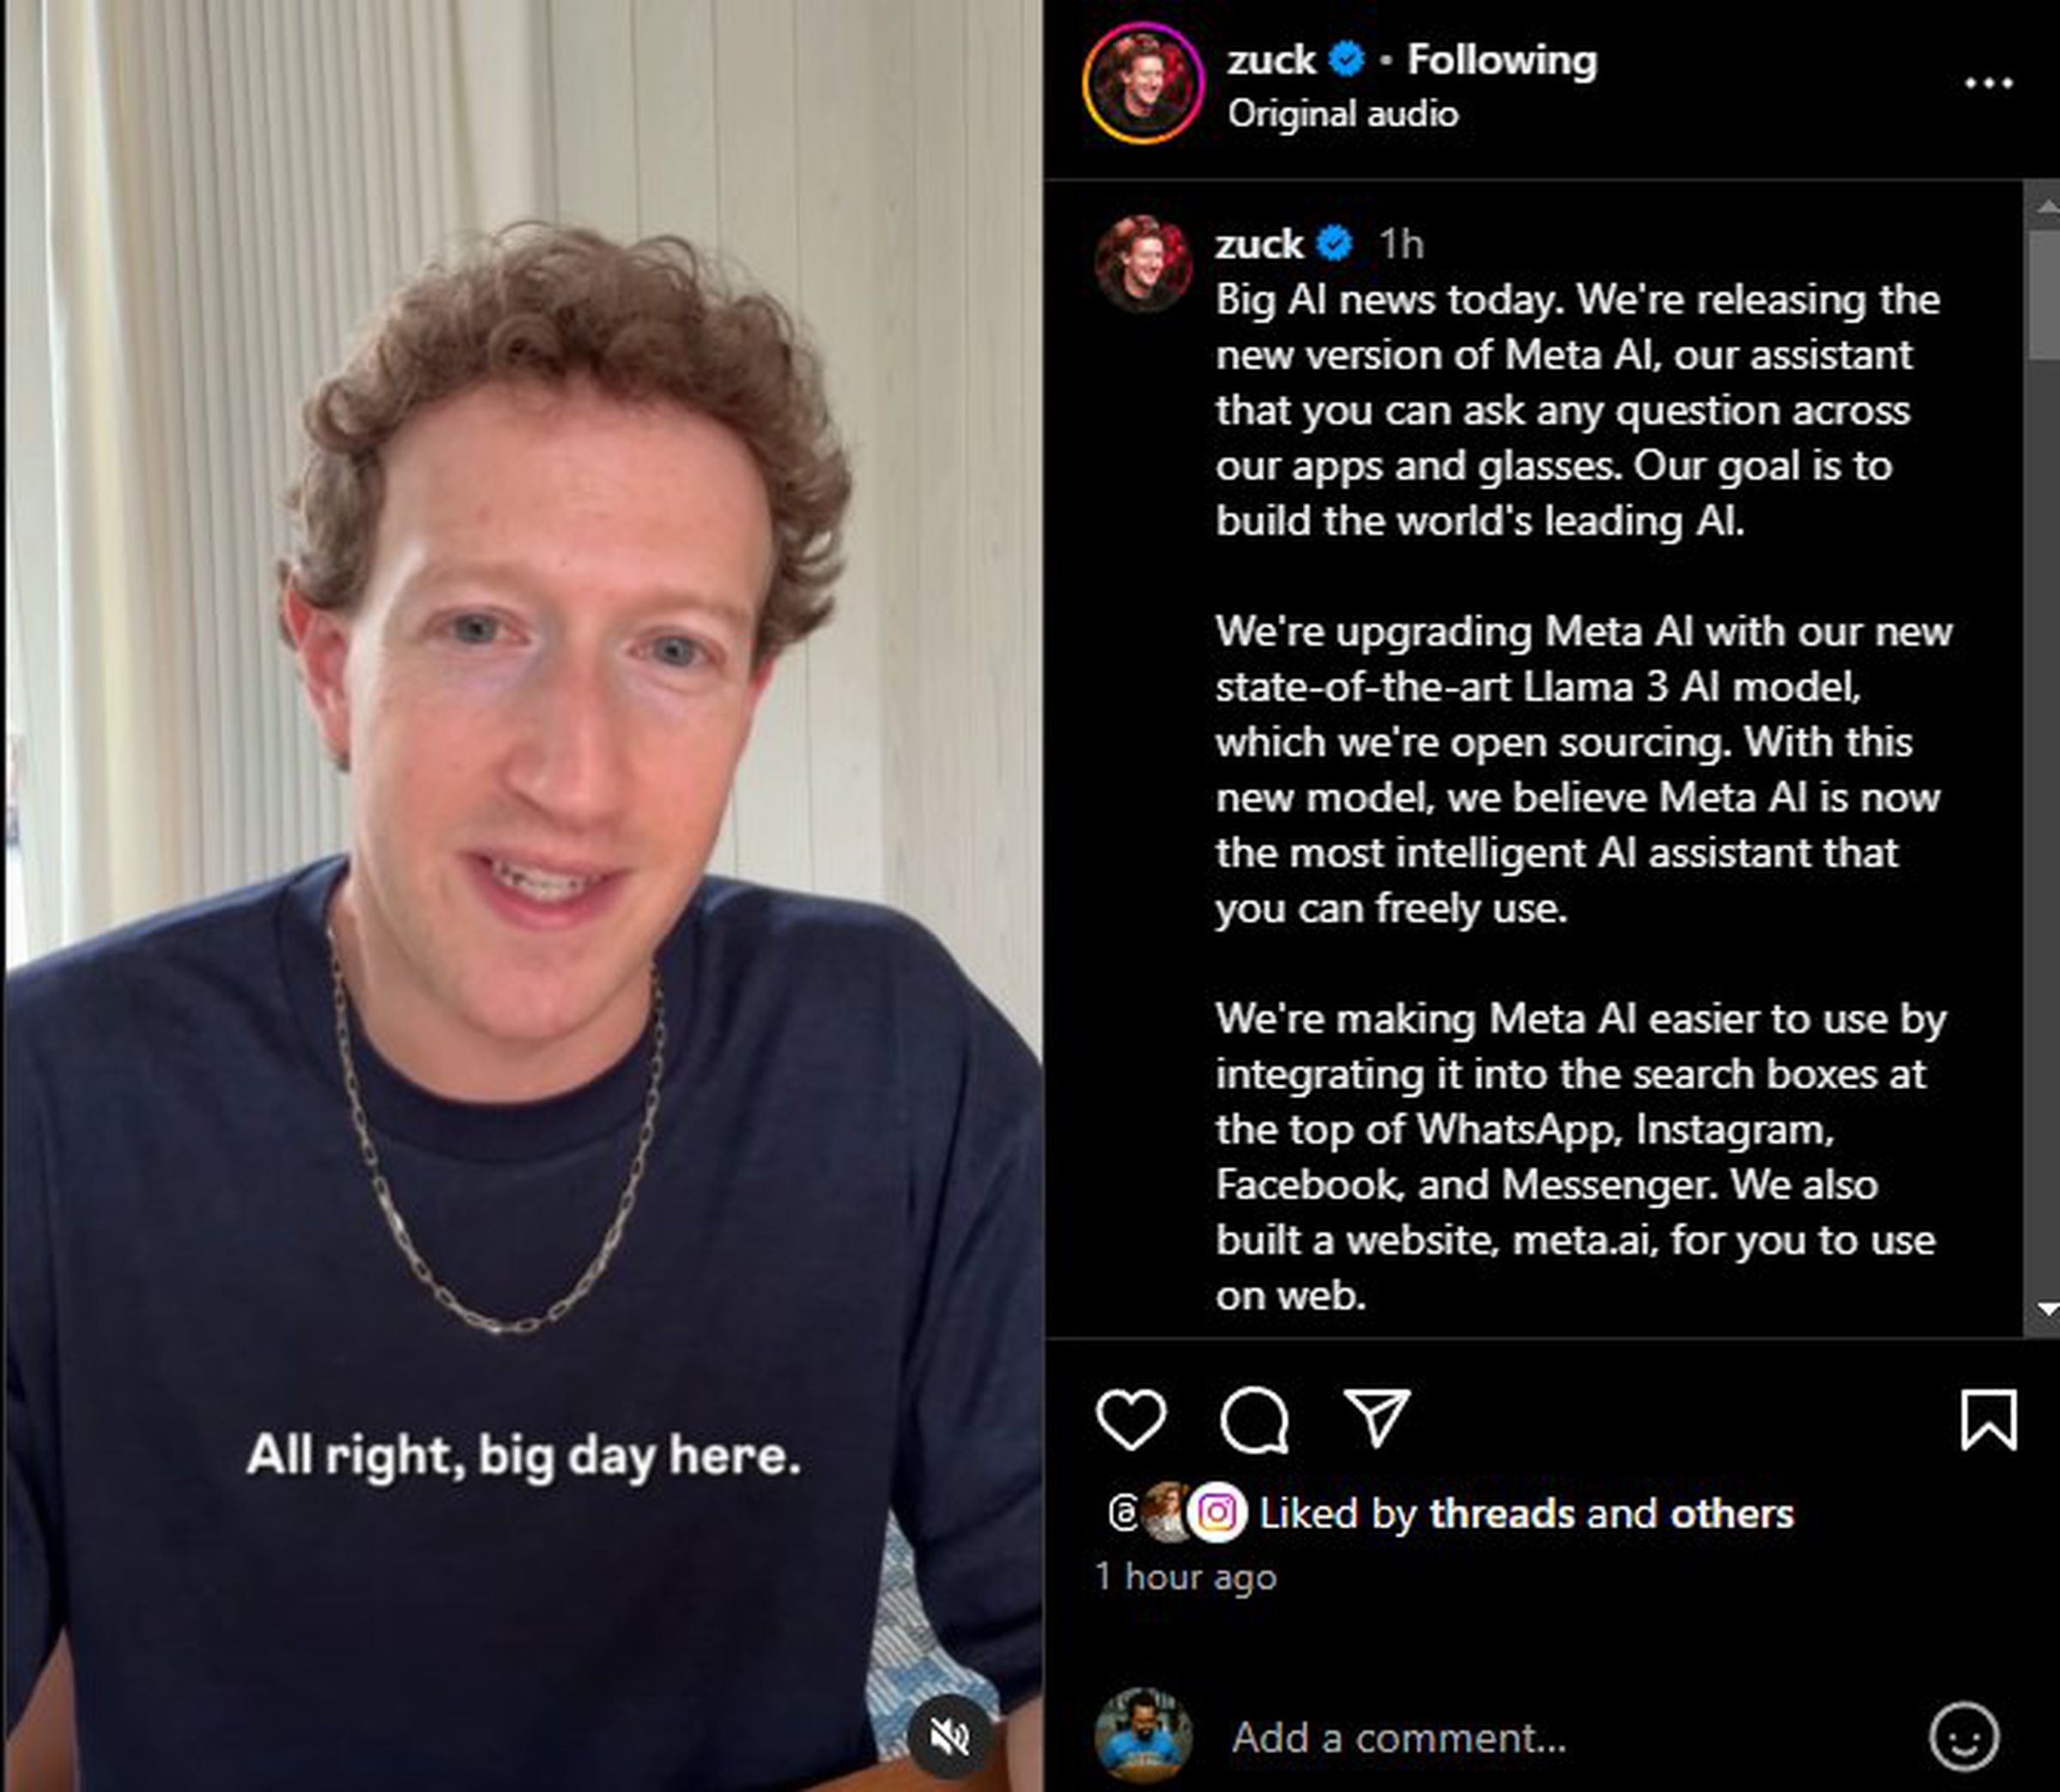 Screenshot of Mark Zuckerberg’s Instagram post announcing LLama 3 features in Meta products, showing the executive wearing a simple metal chain.